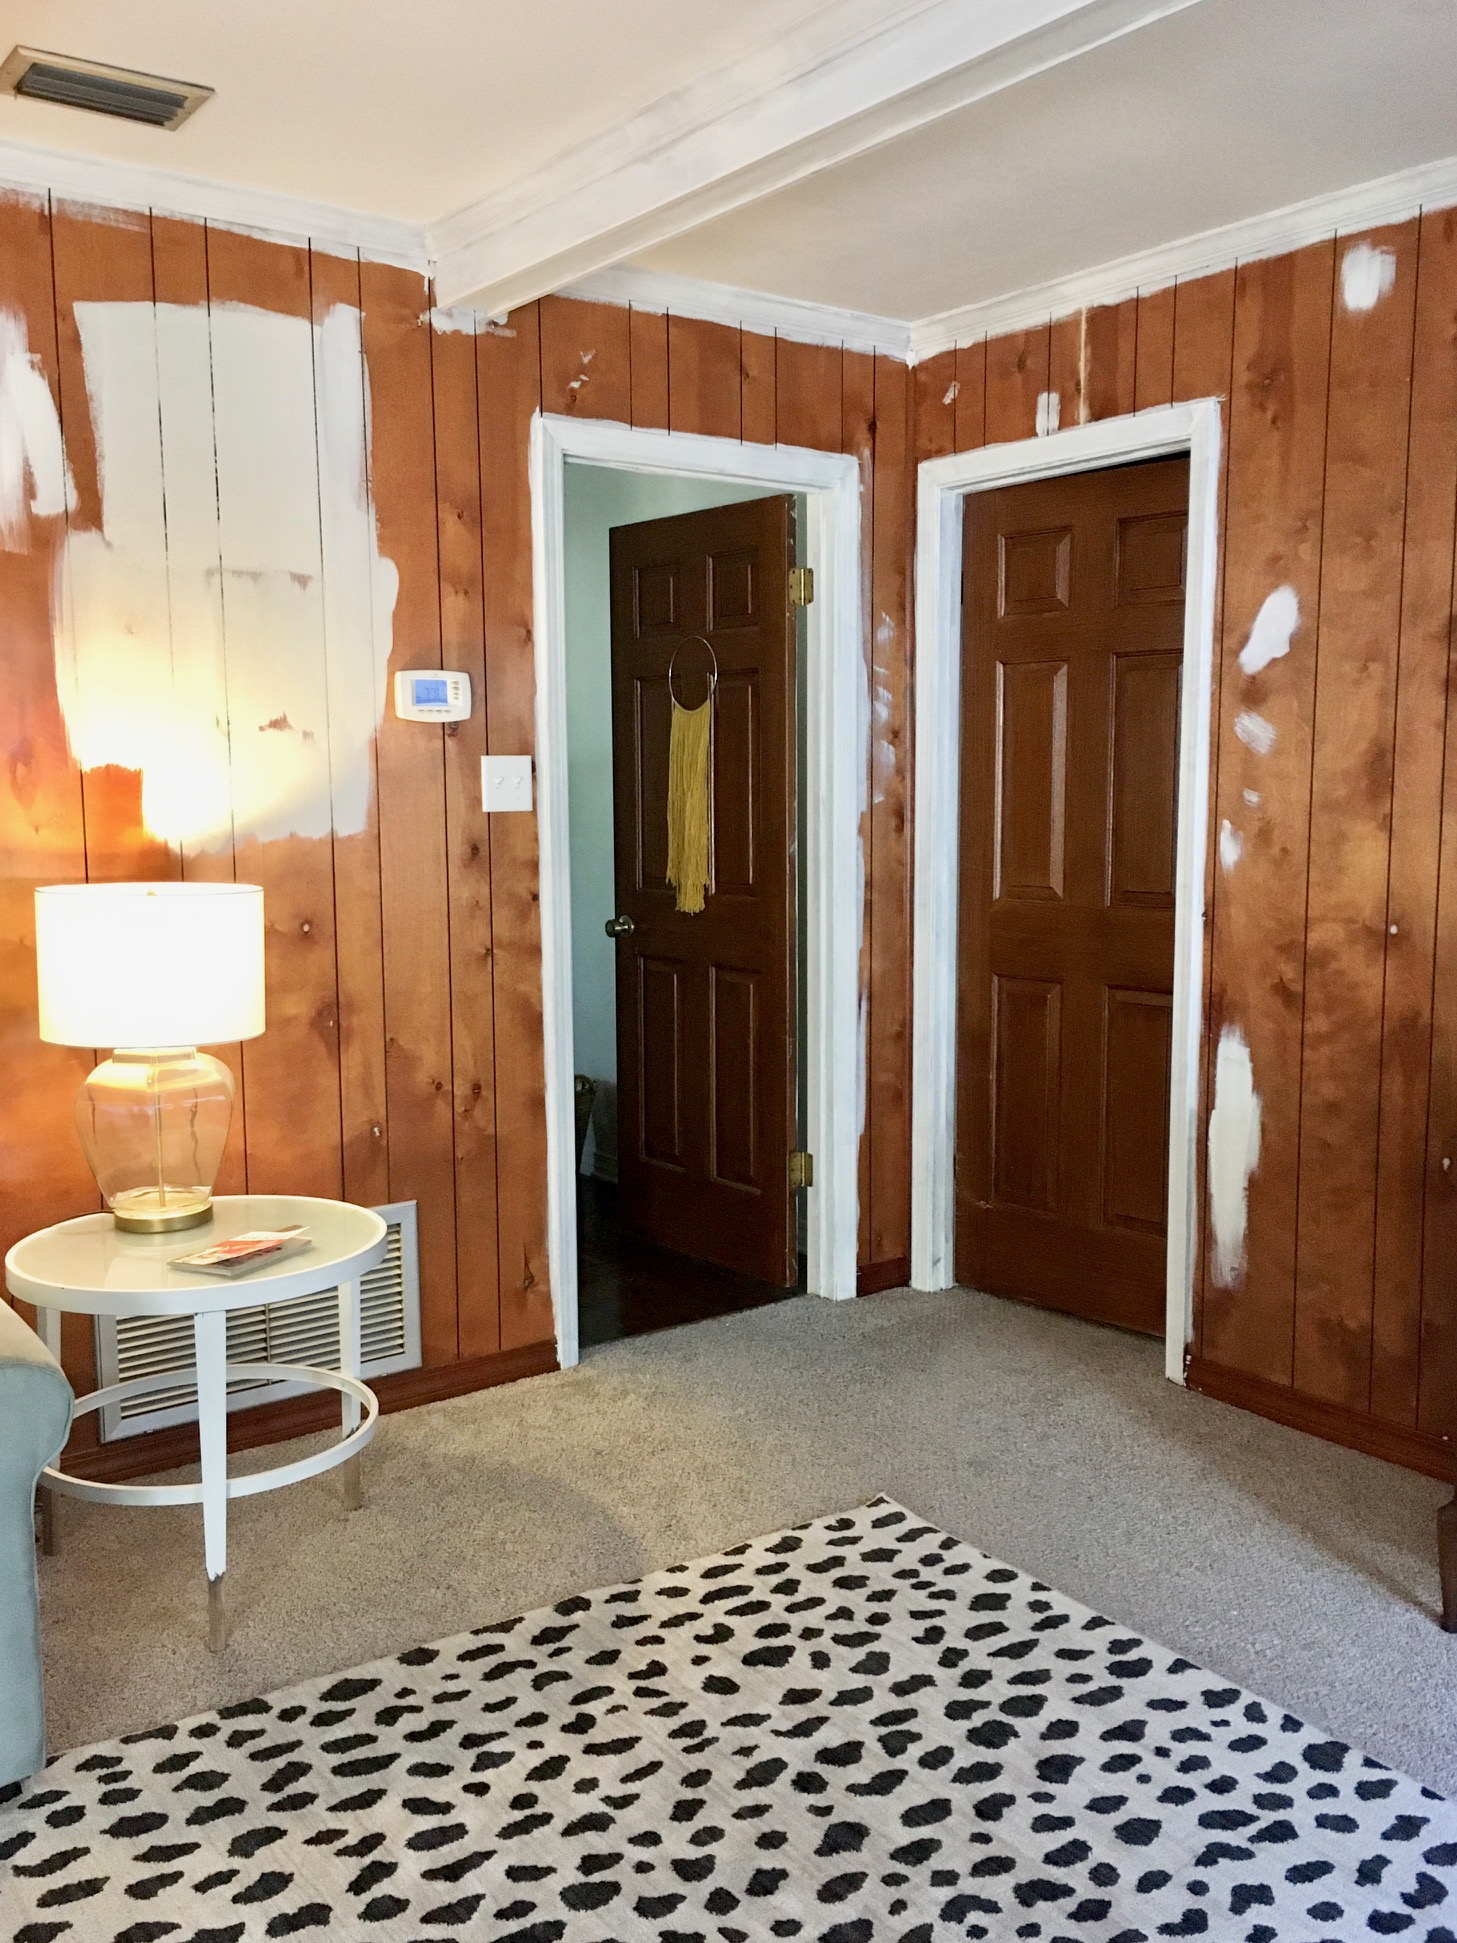 How to Paint Wood Paneling Successfully - In My Own Style